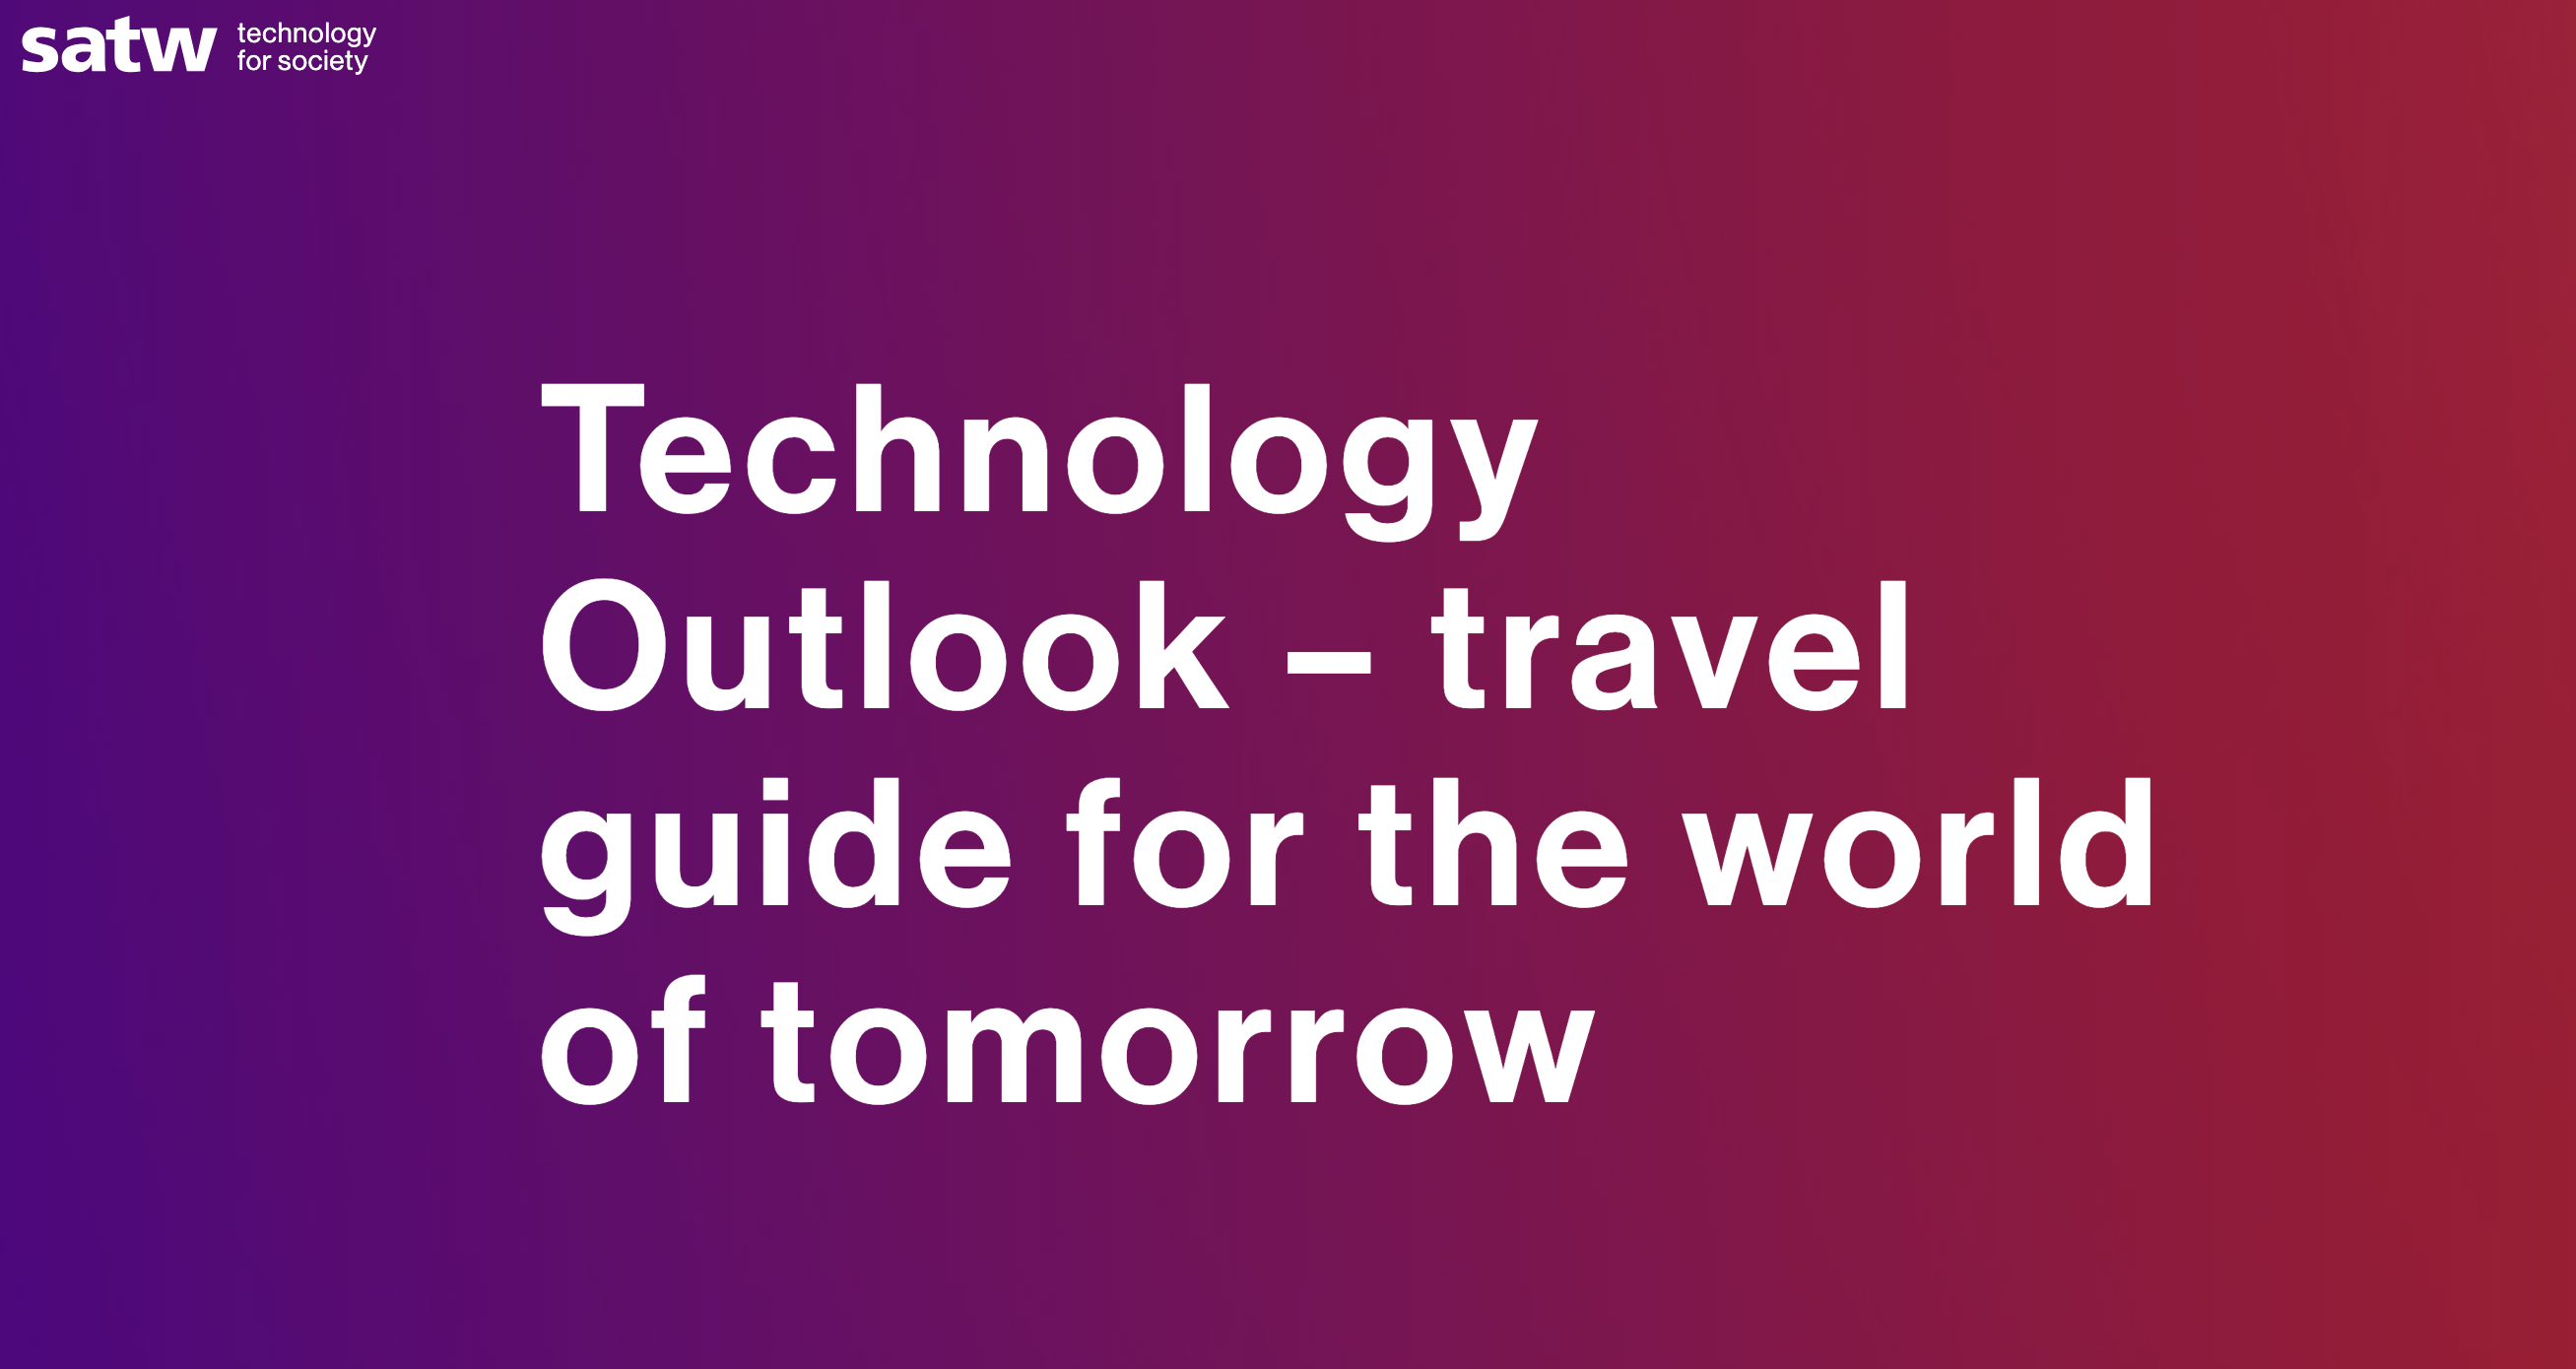 The background changes from purple on the left to red on the right, the satw logo in white at the top left and the text “Technology Outlook – travel guide for the world of tomorrow” in white in the middle